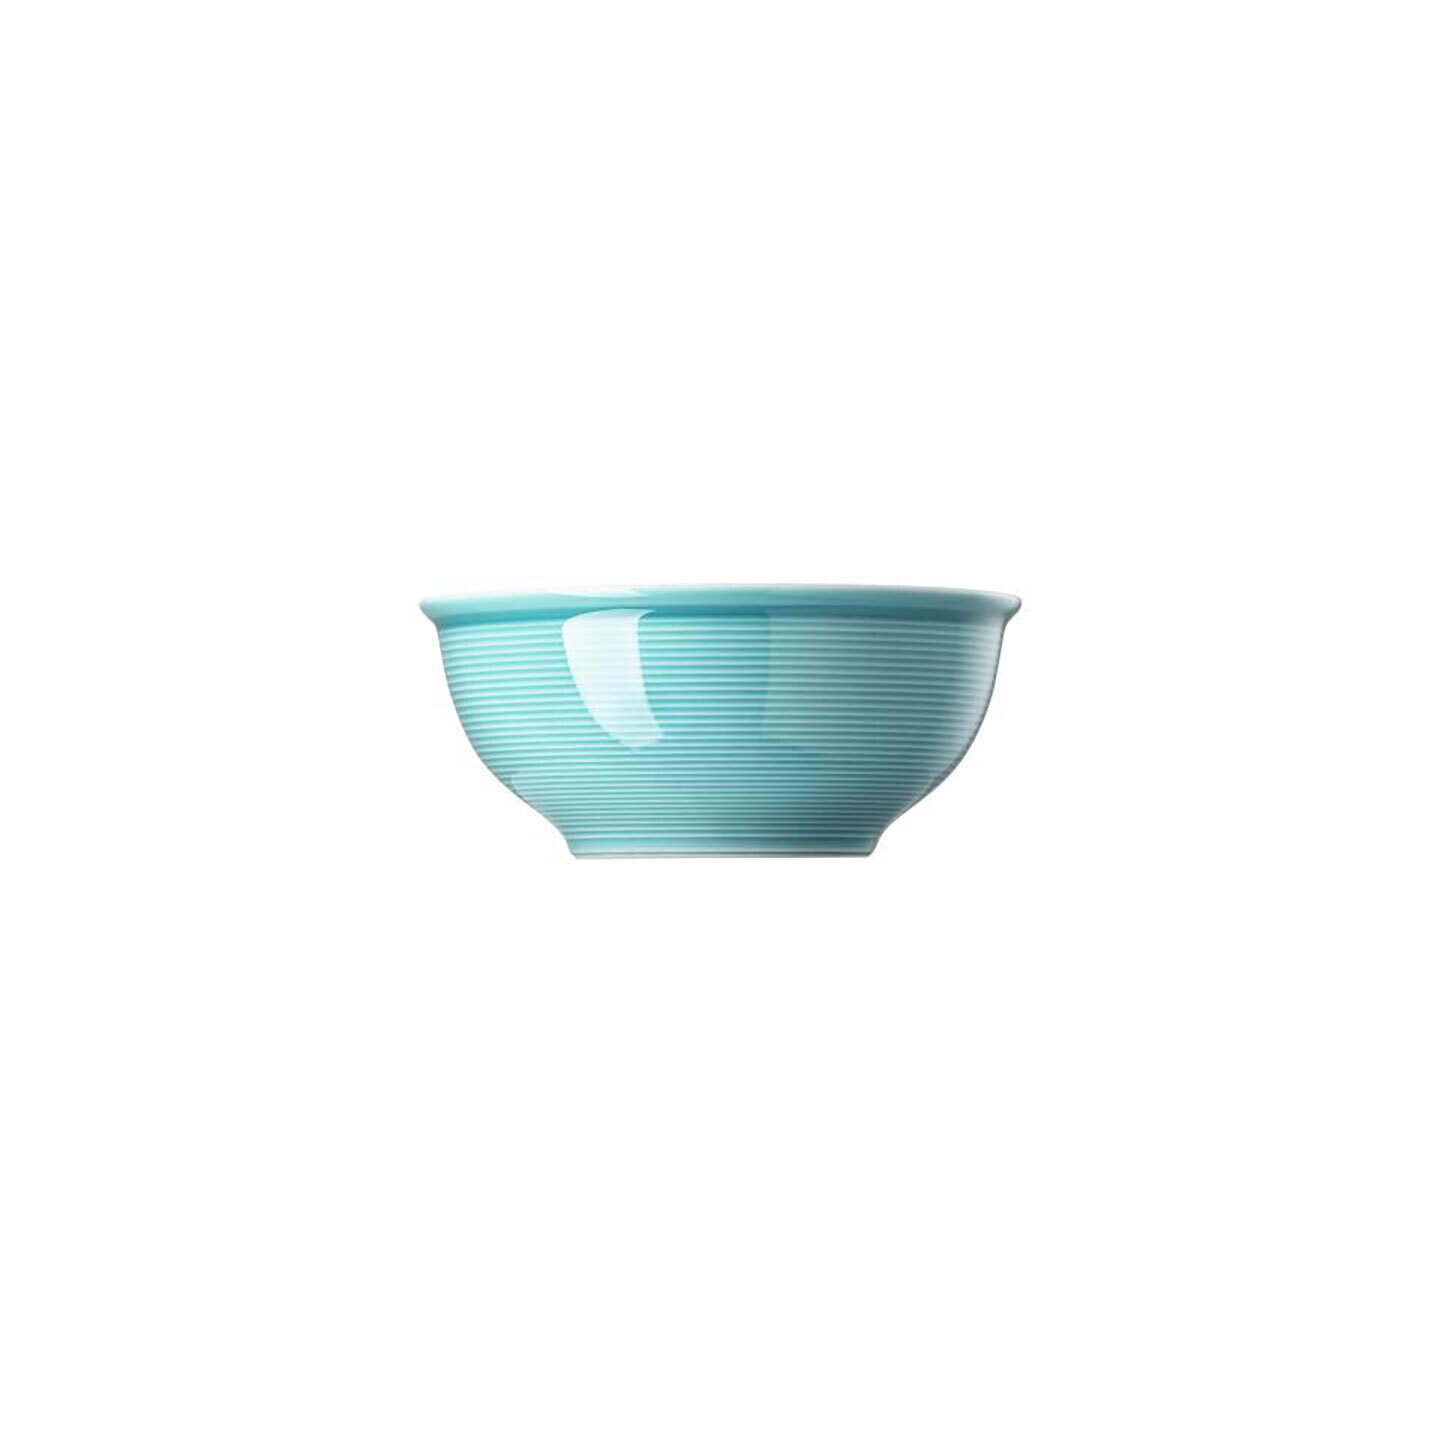 Thomas Trend Ice Blue Cereal Bowl 11400-401921-15266